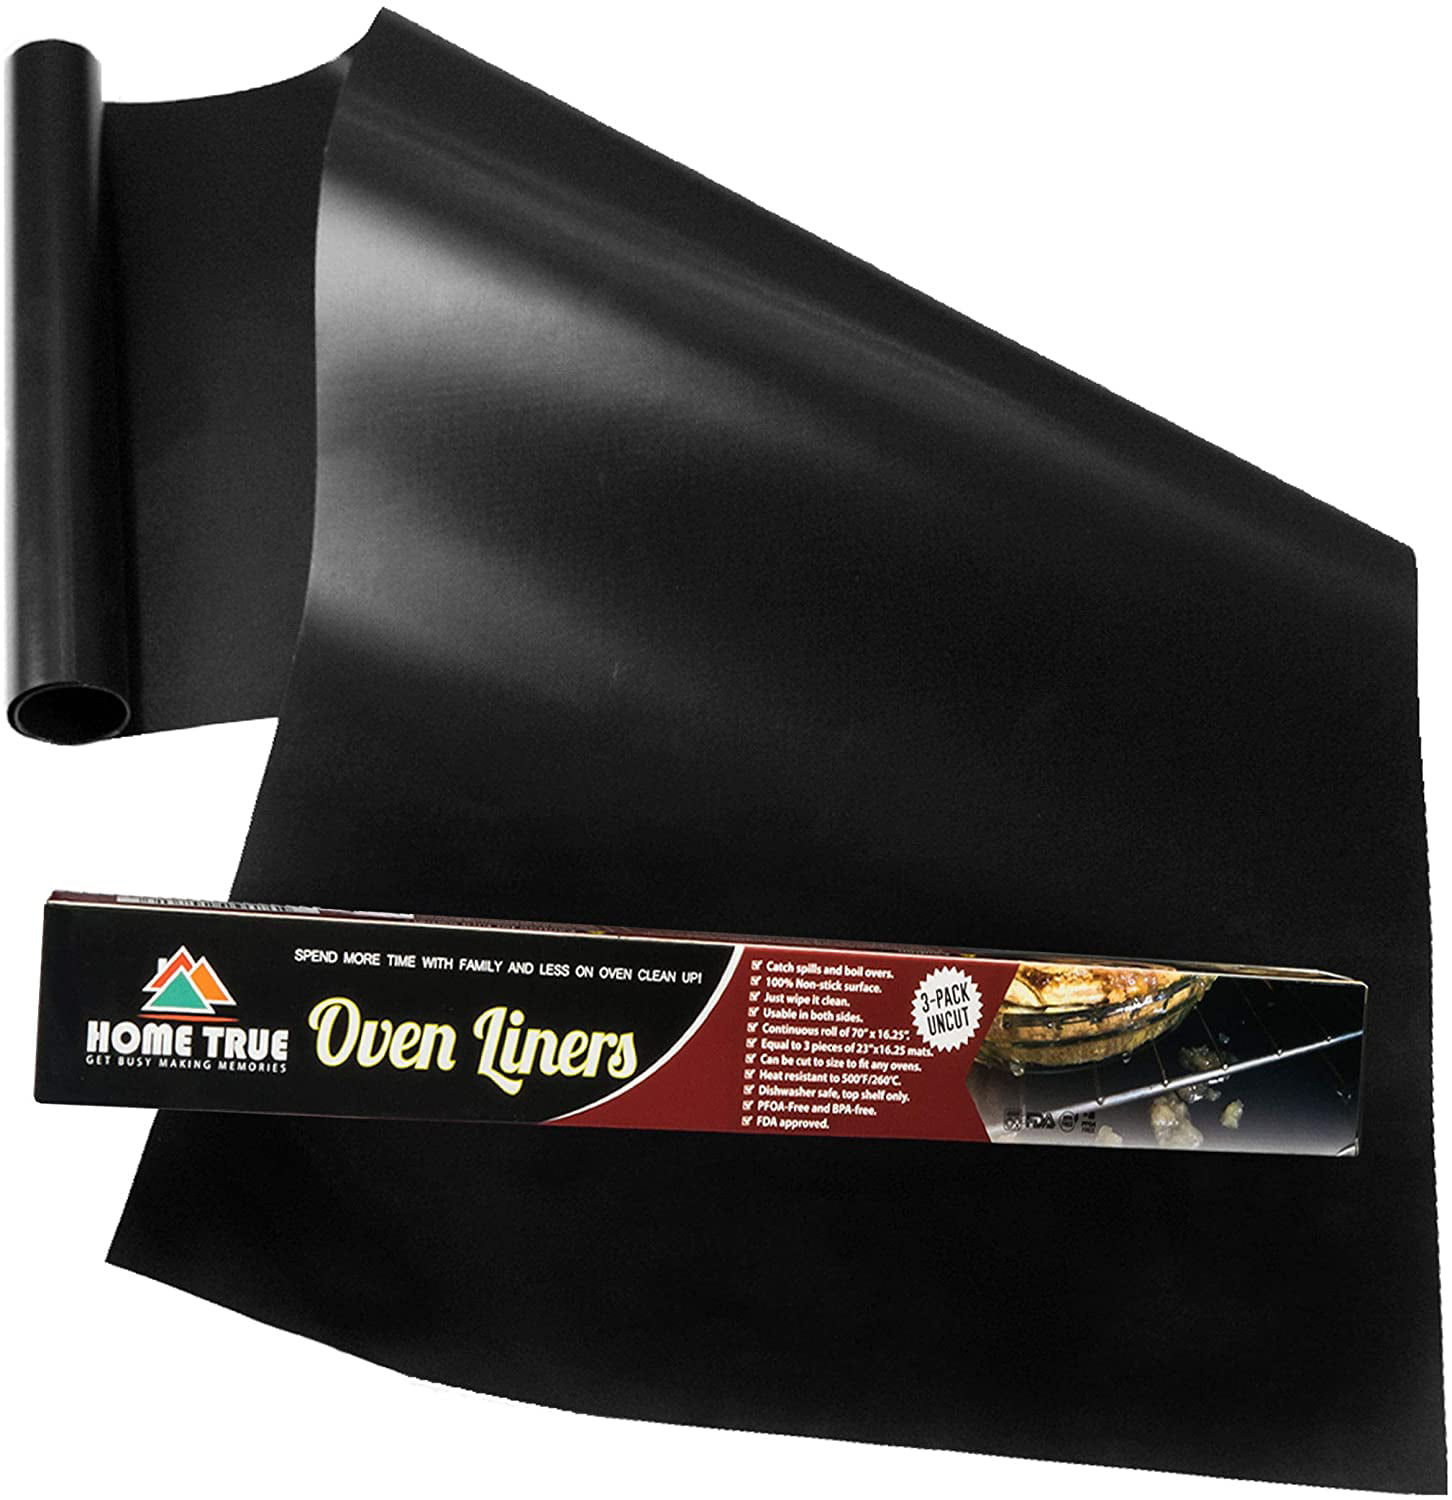 TEFLON NON STICK STAY CLEAN OVEN LINER LINERS 50CM X 40CM PACK OF 2 